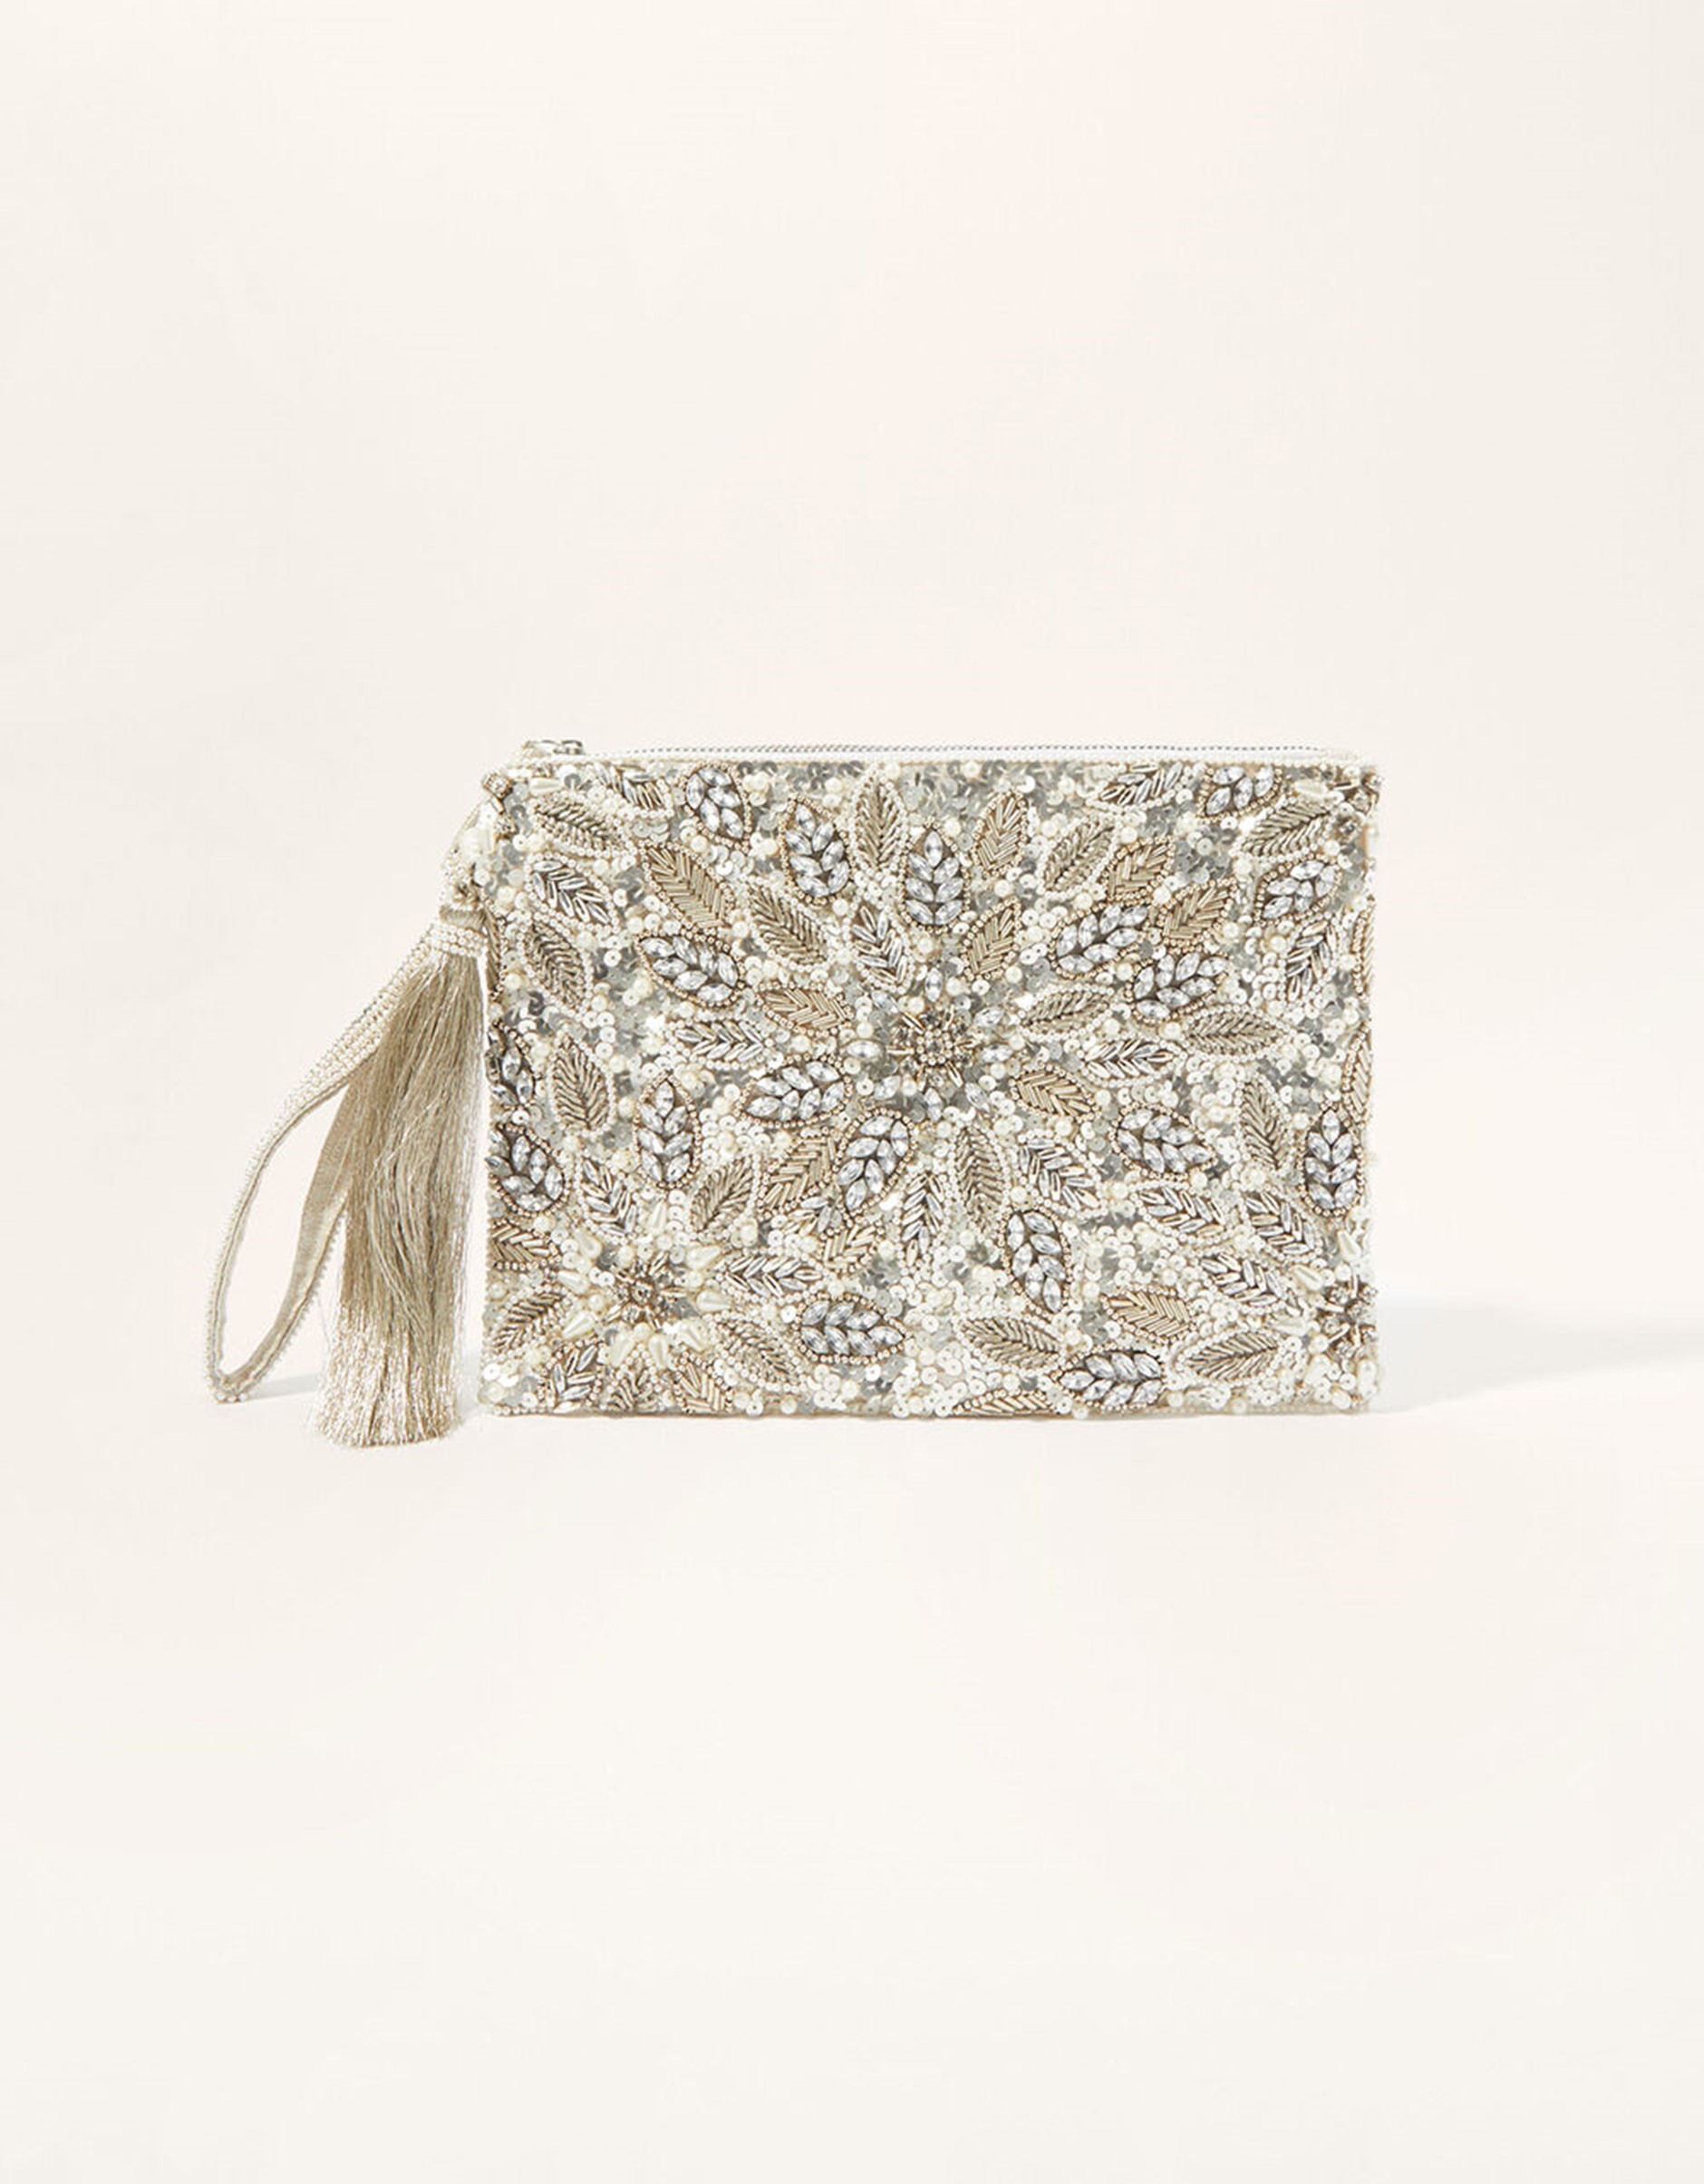 18 Top Purses for Wedding Guests, According to Our Editors